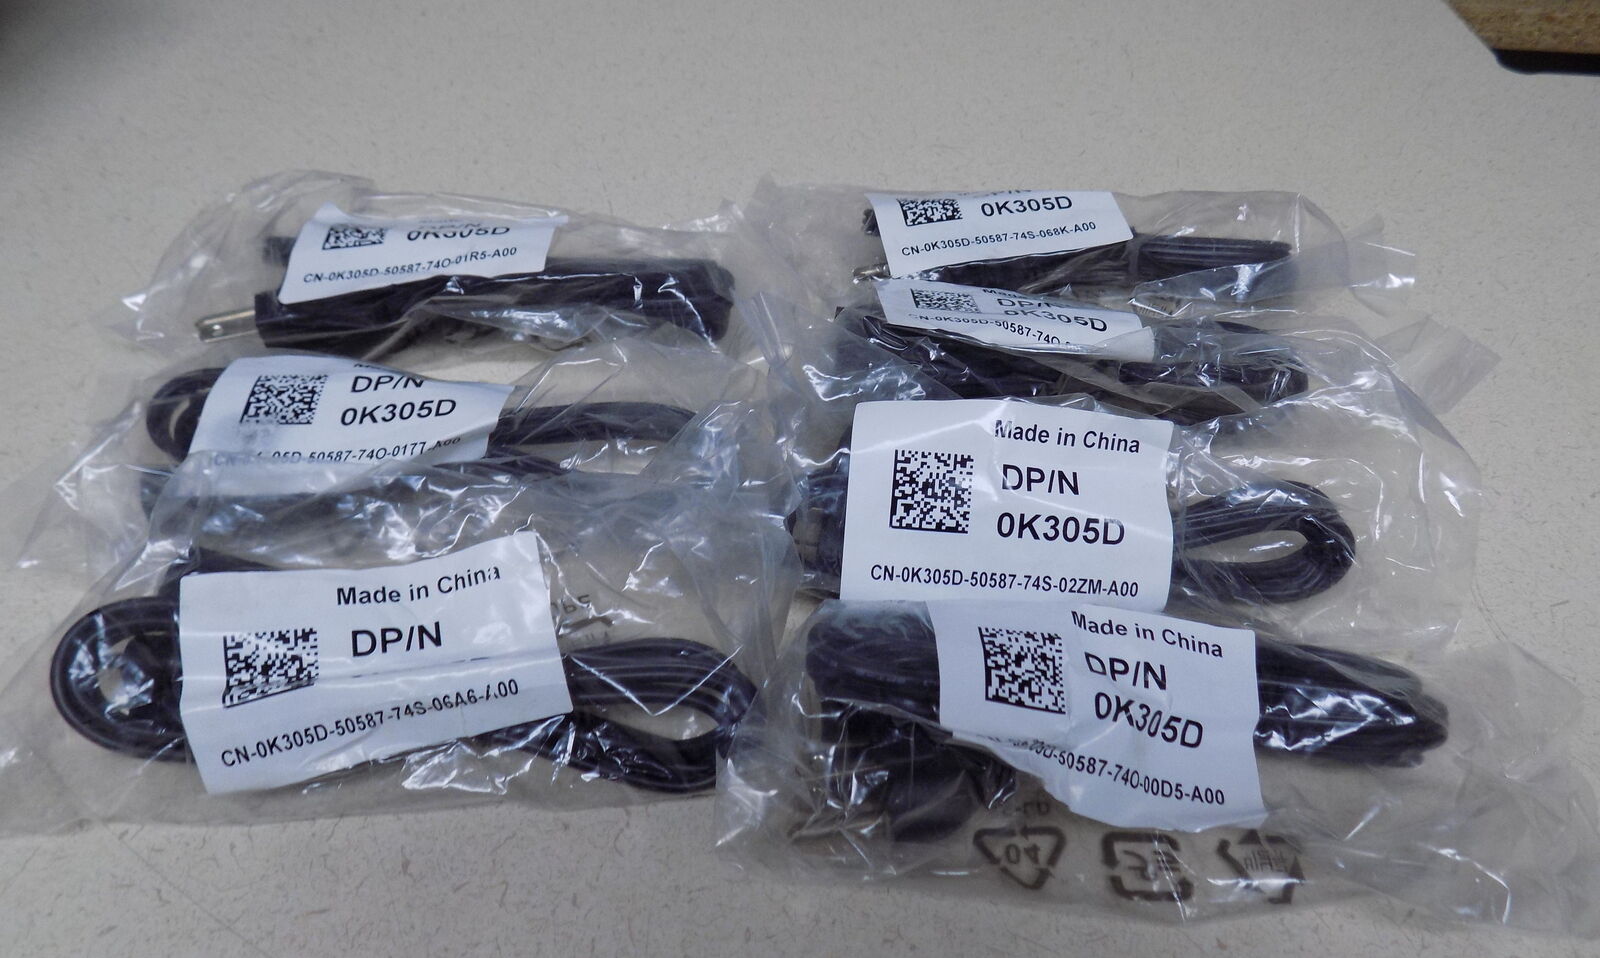 Lot of 7 - Dell DP/N 0K305D Power Cords 125V 10A 3ft